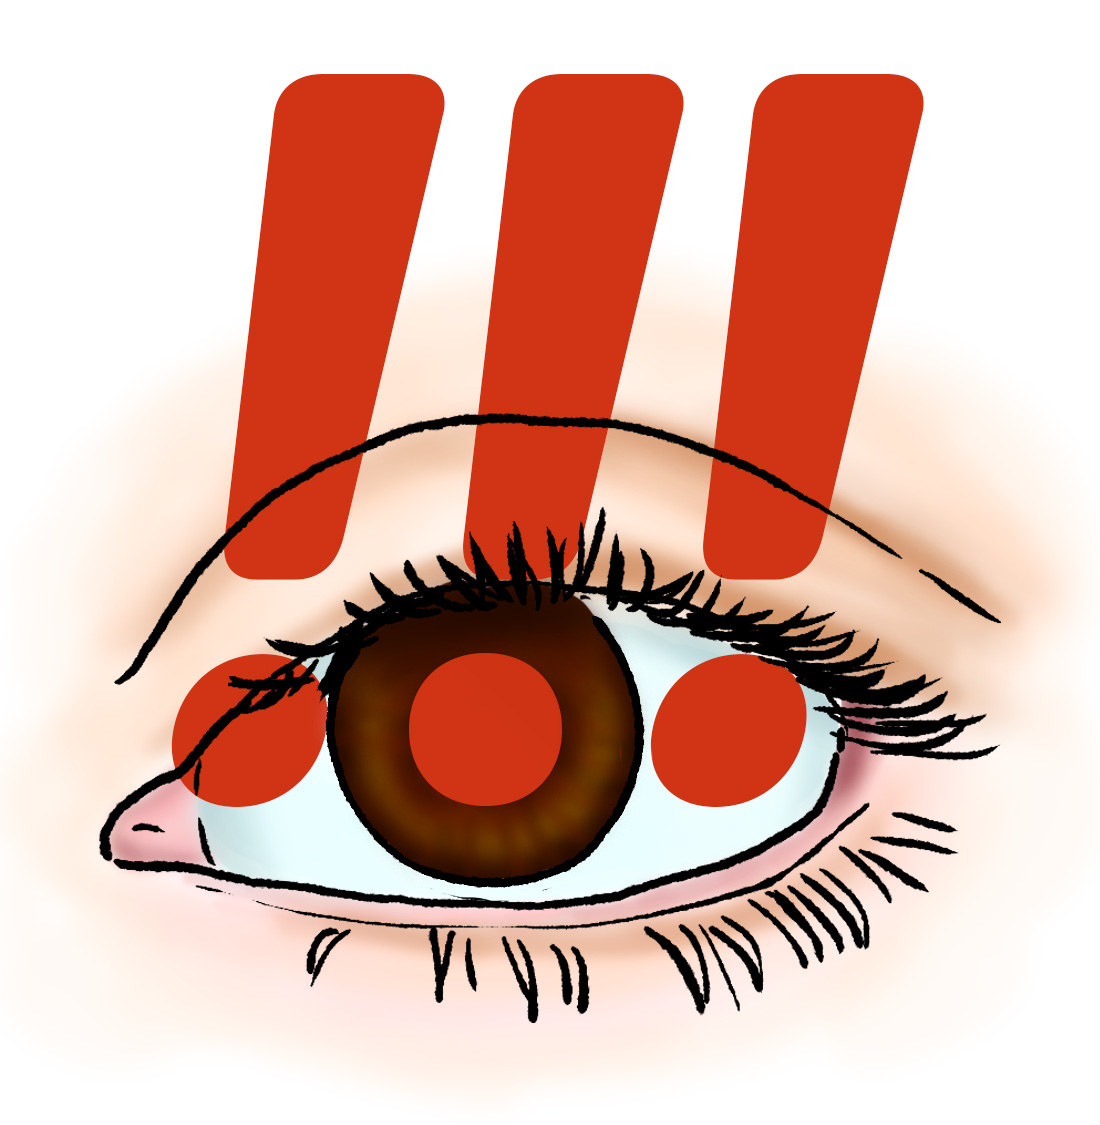 An illustration of an eye with three exclamation points over top. The point of the middle exclamation point is replacing the pupil